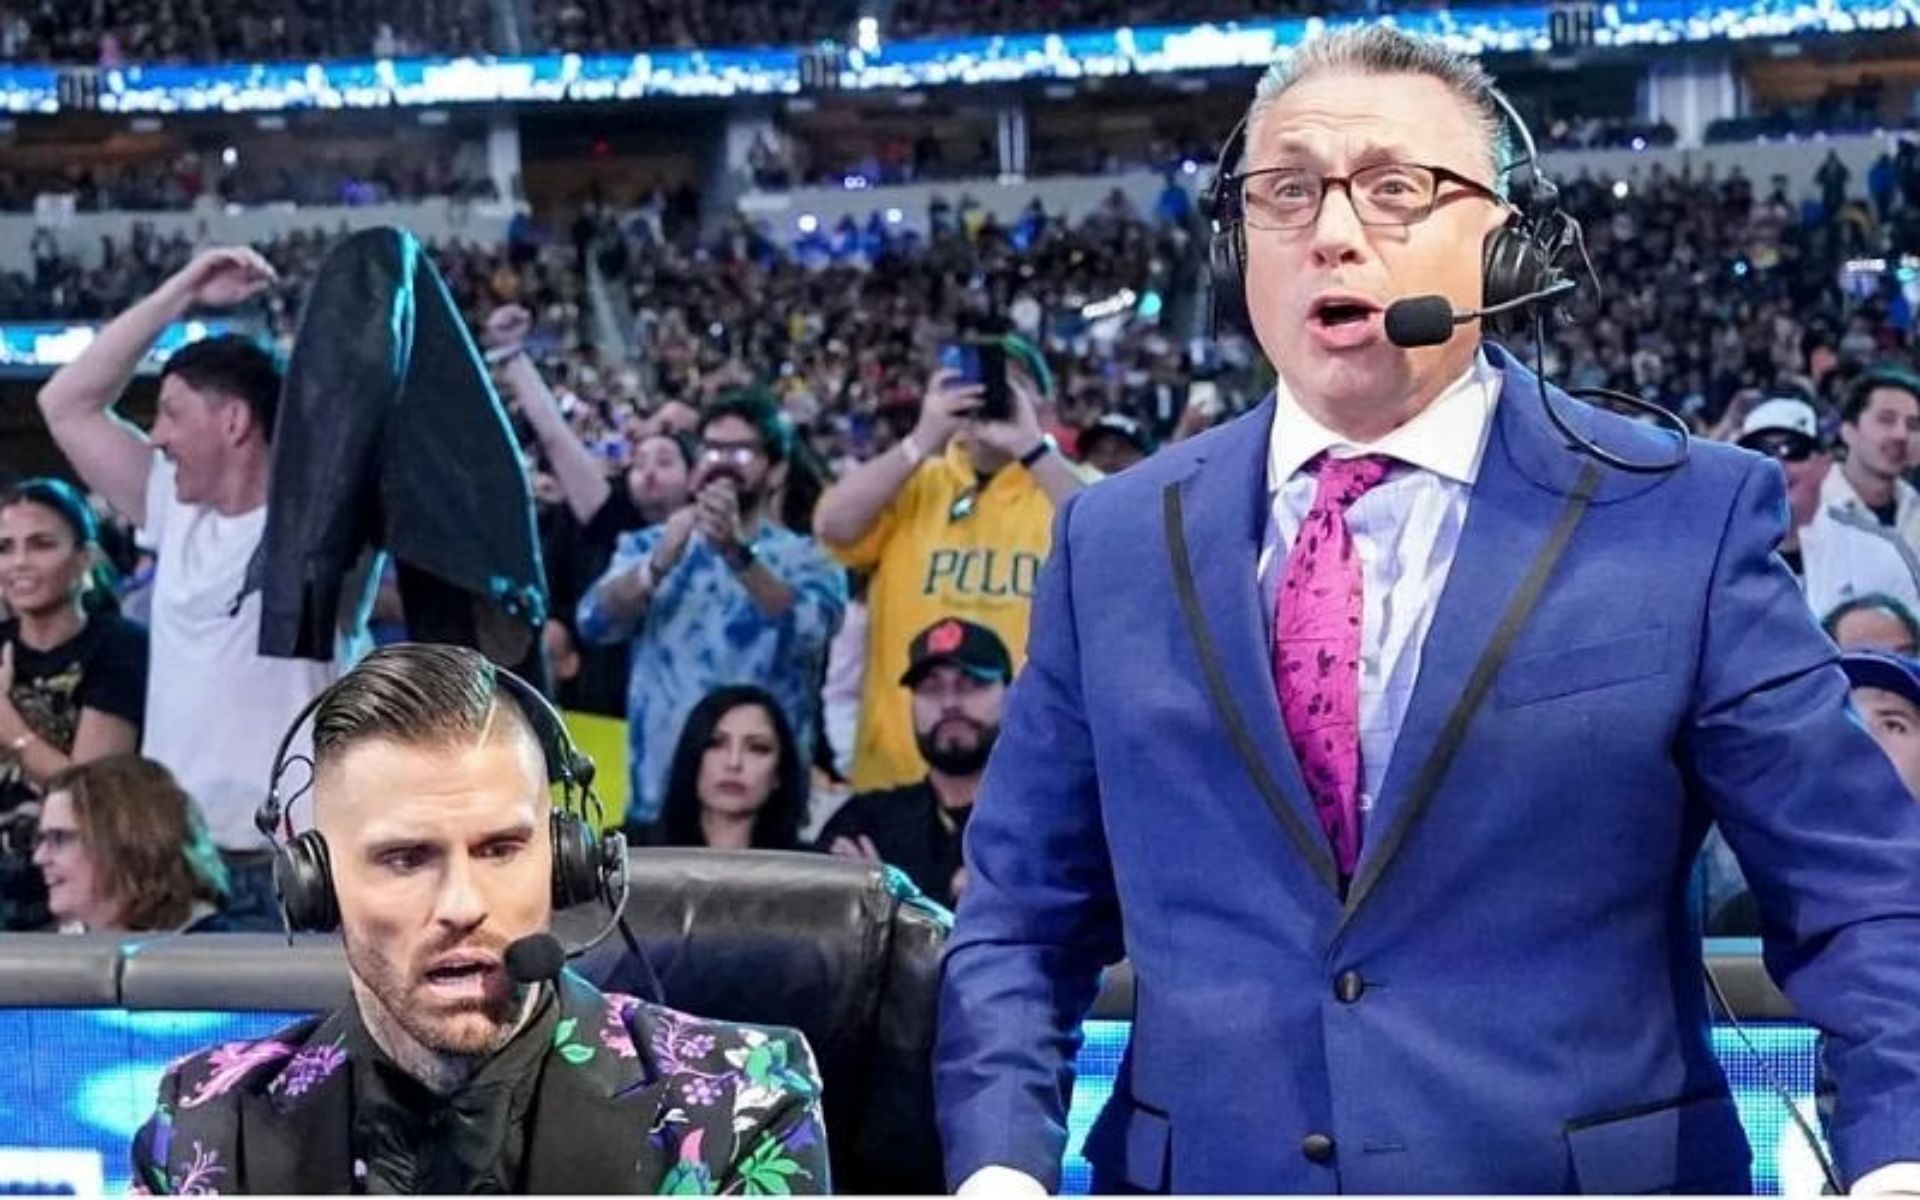 The feud continues for the SmackDown commentator